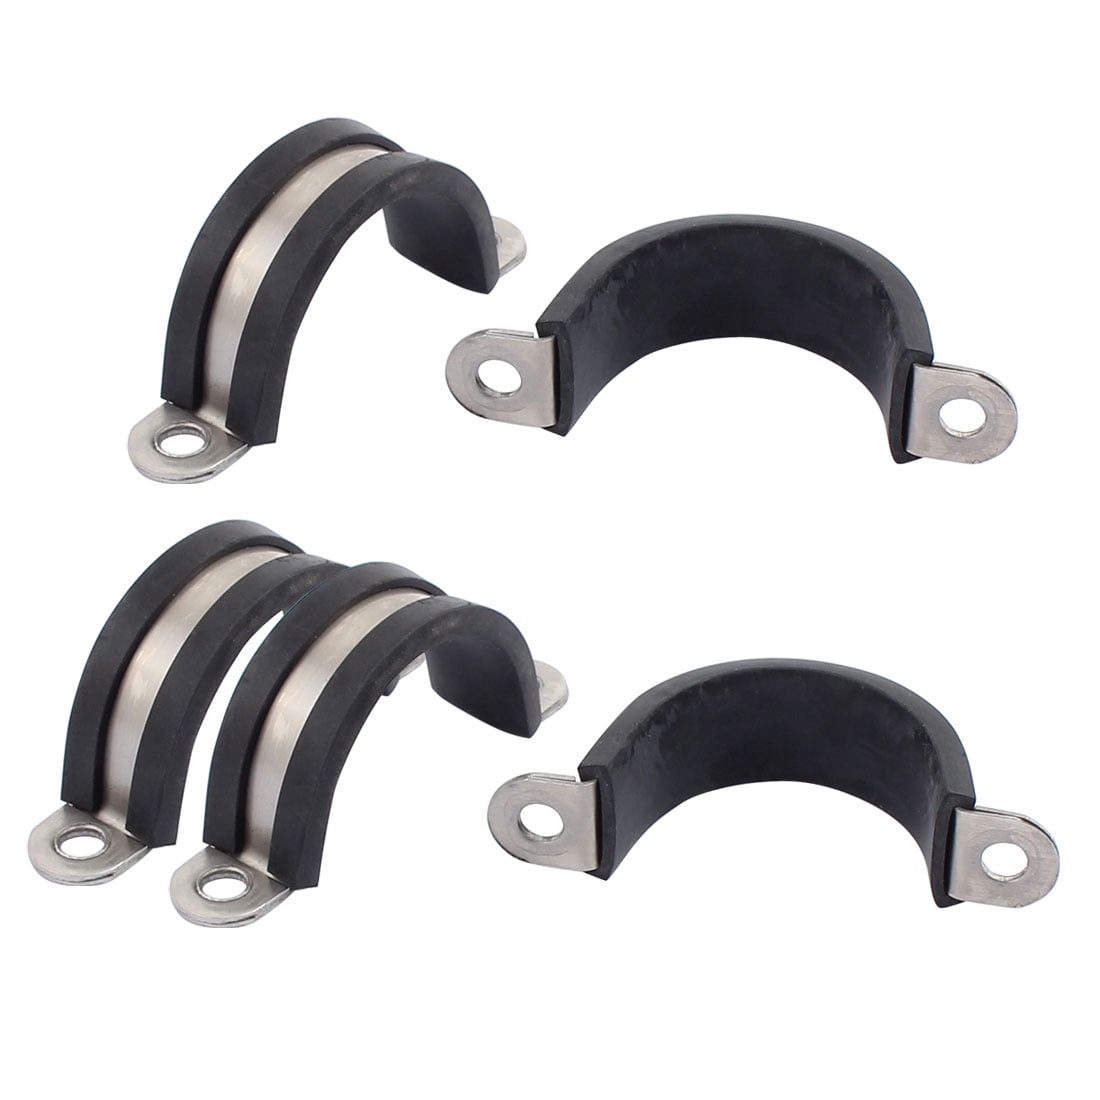 New chrome saddle bands 15mm bracket pipe clips plumbing DIY Pack of 20 